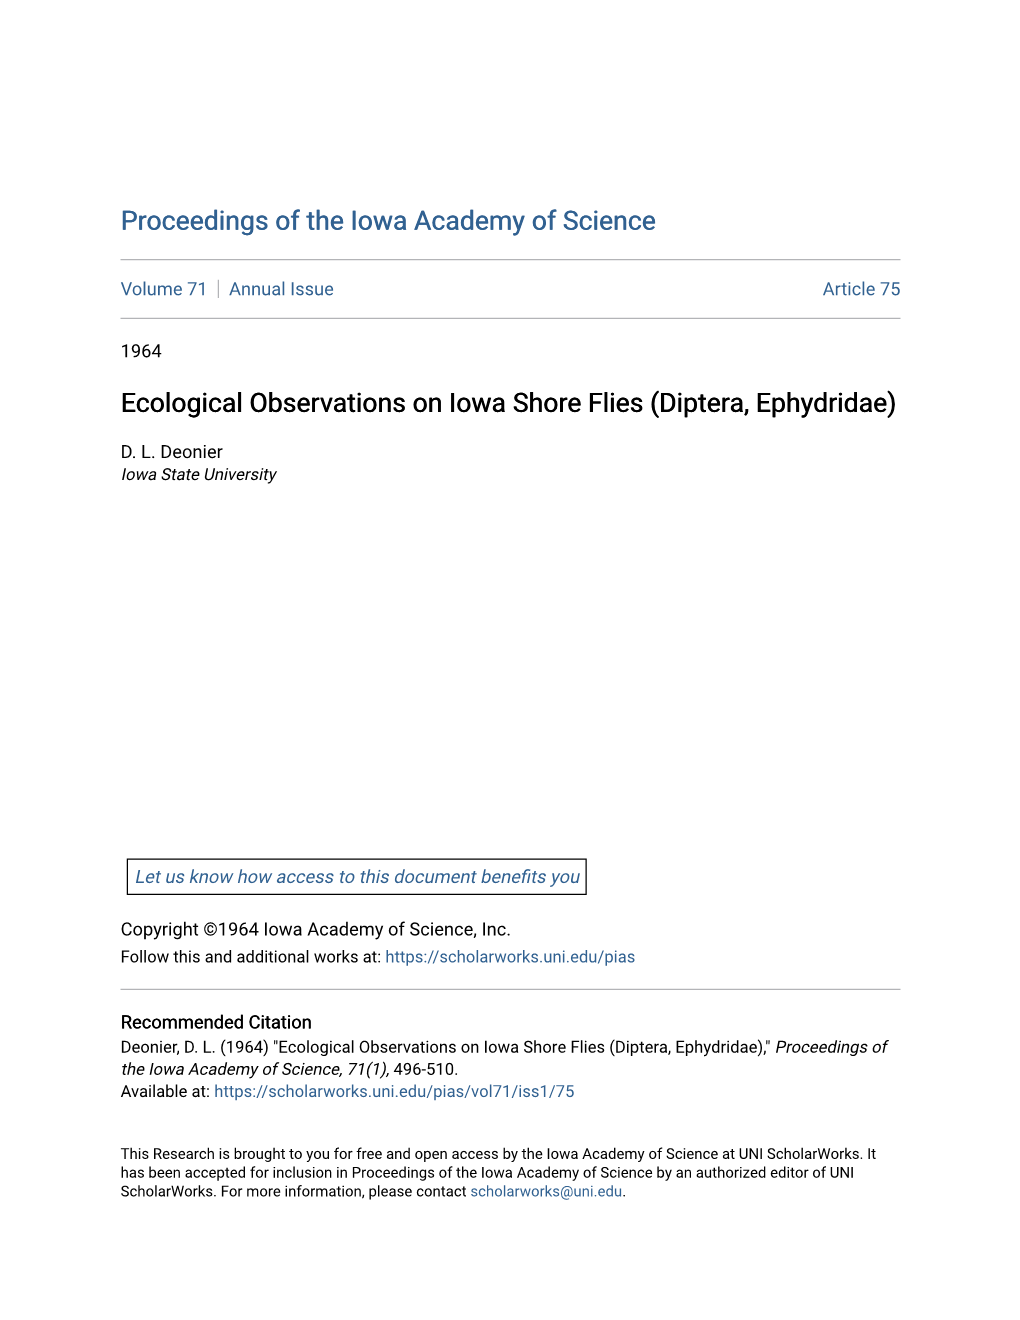 Ecological Observations on Iowa Shore Flies (Diptera, Ephydridae)